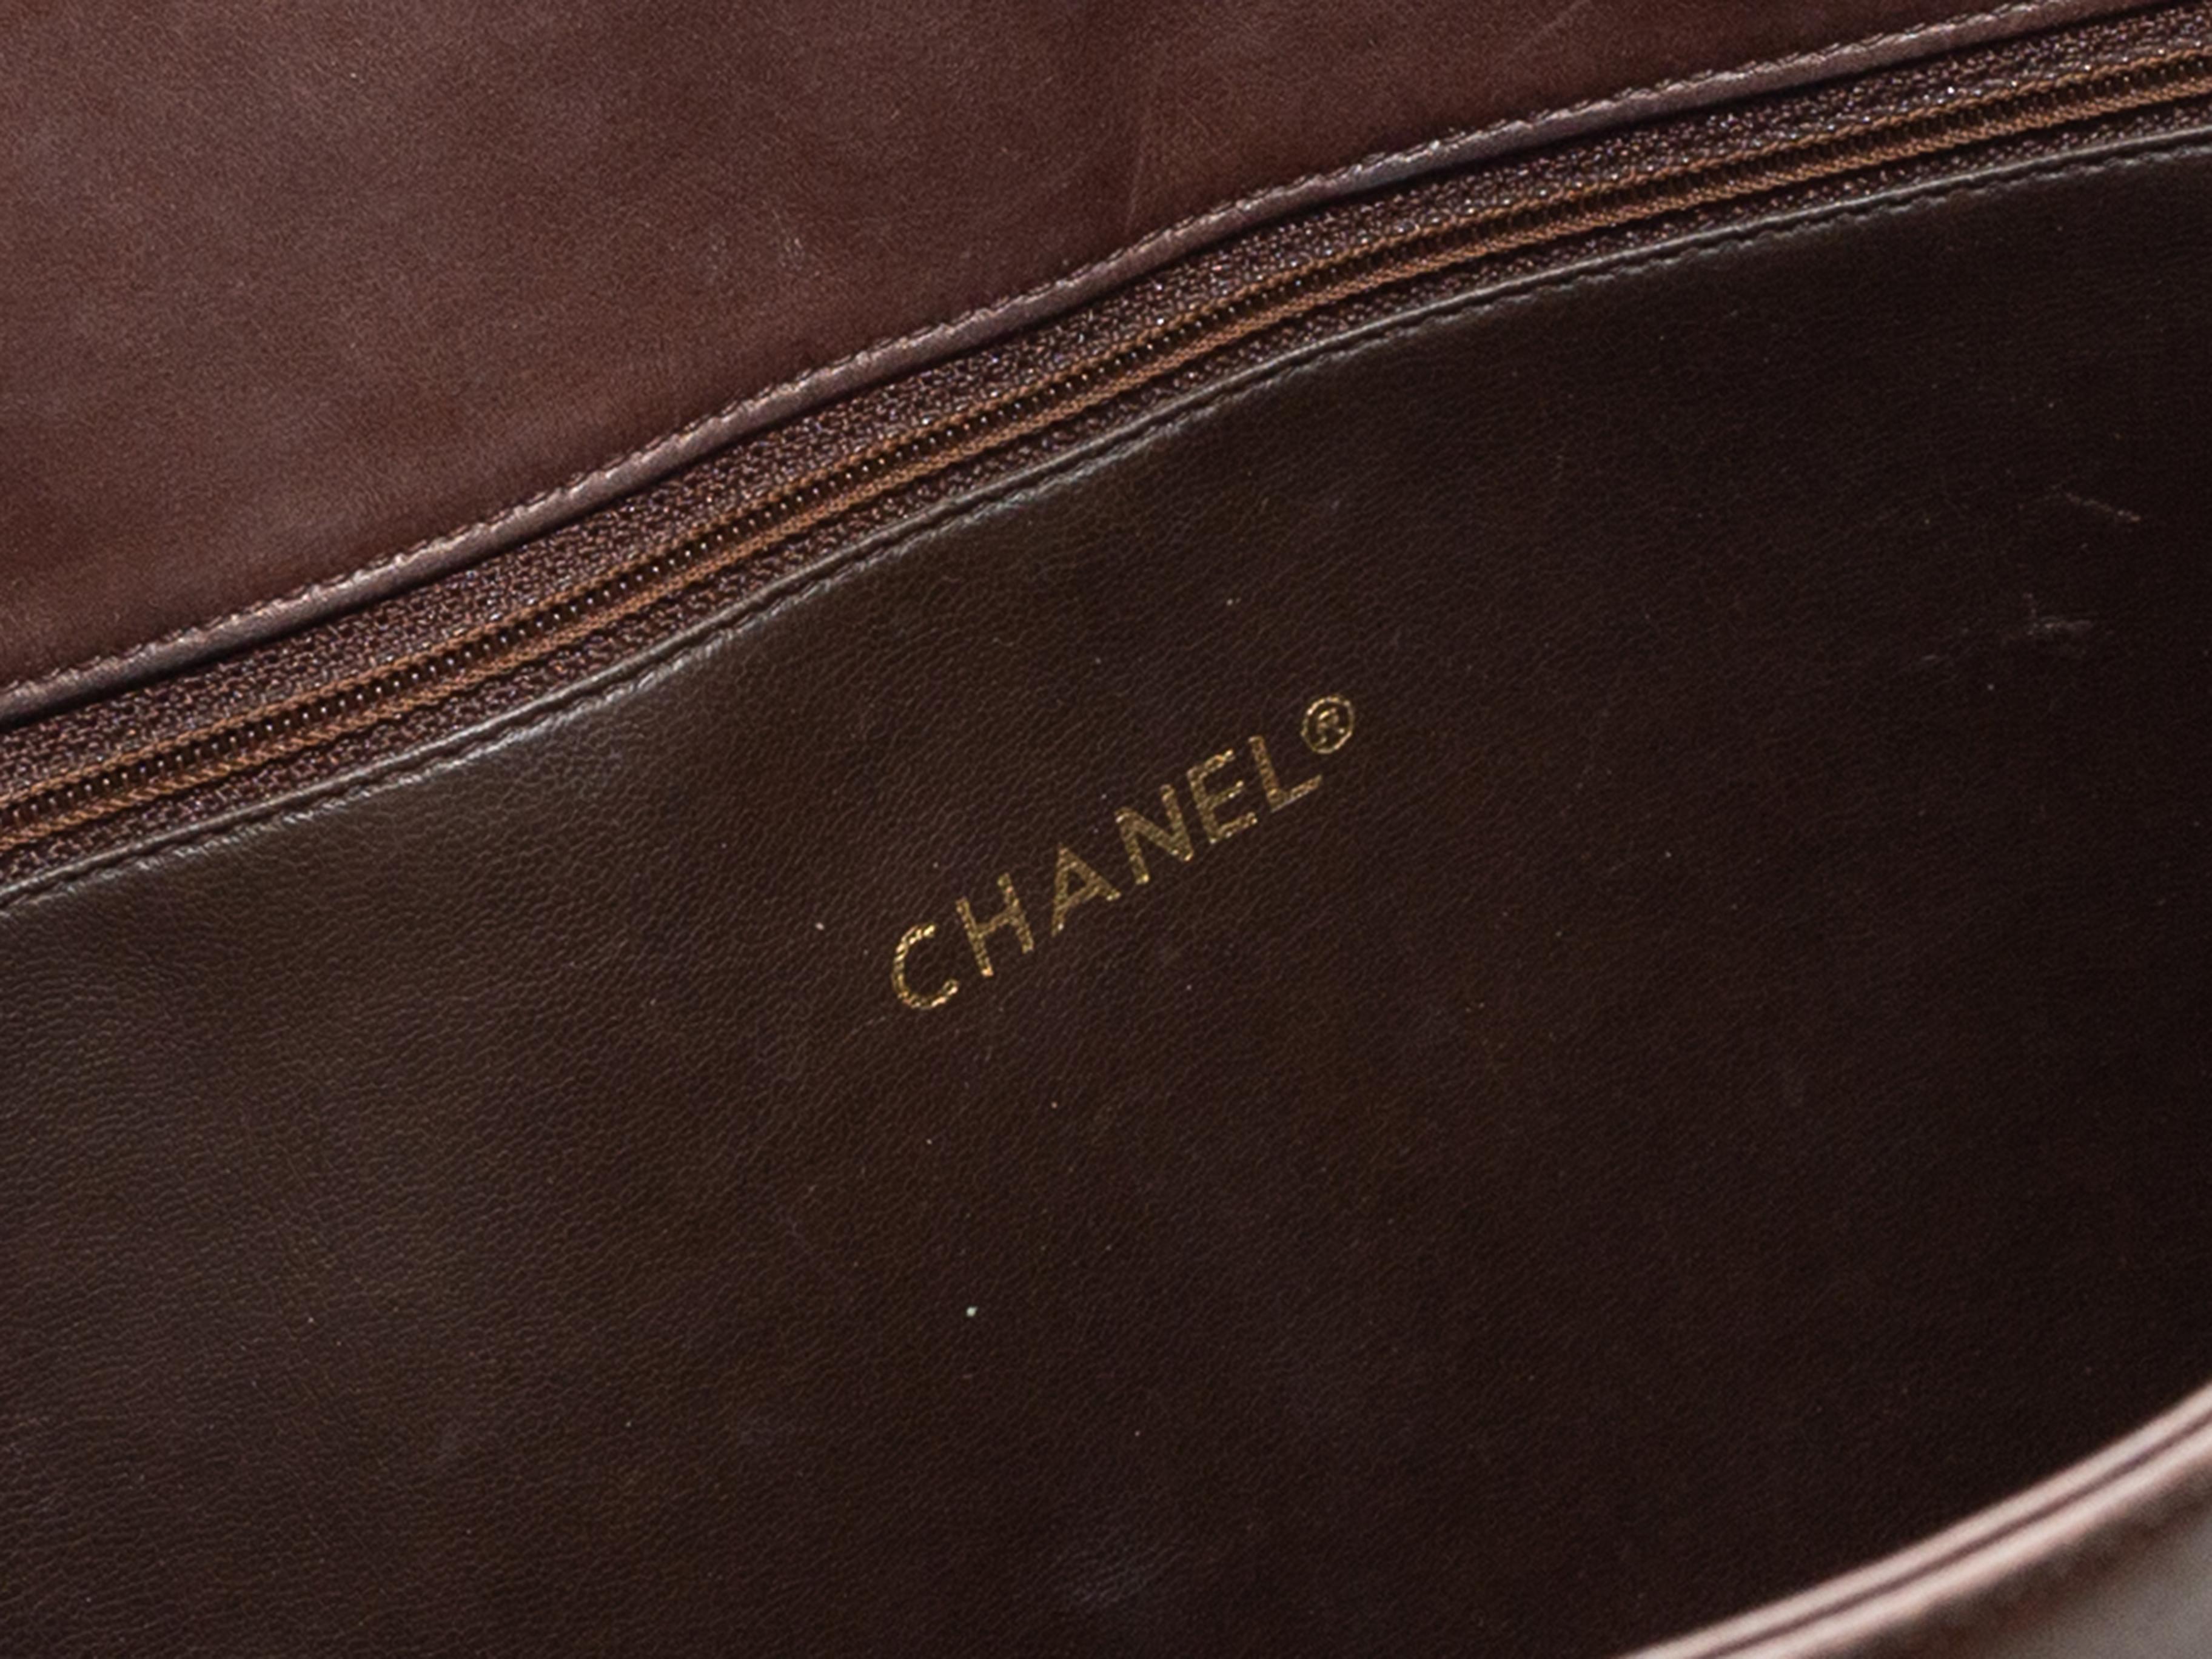 Product details: Vintage brown leather tote bag by Chanel. Circa late 1980s. Gold-tone hardware. Interior zip pocket. Dual chain-link and leather shoulder straps. 14